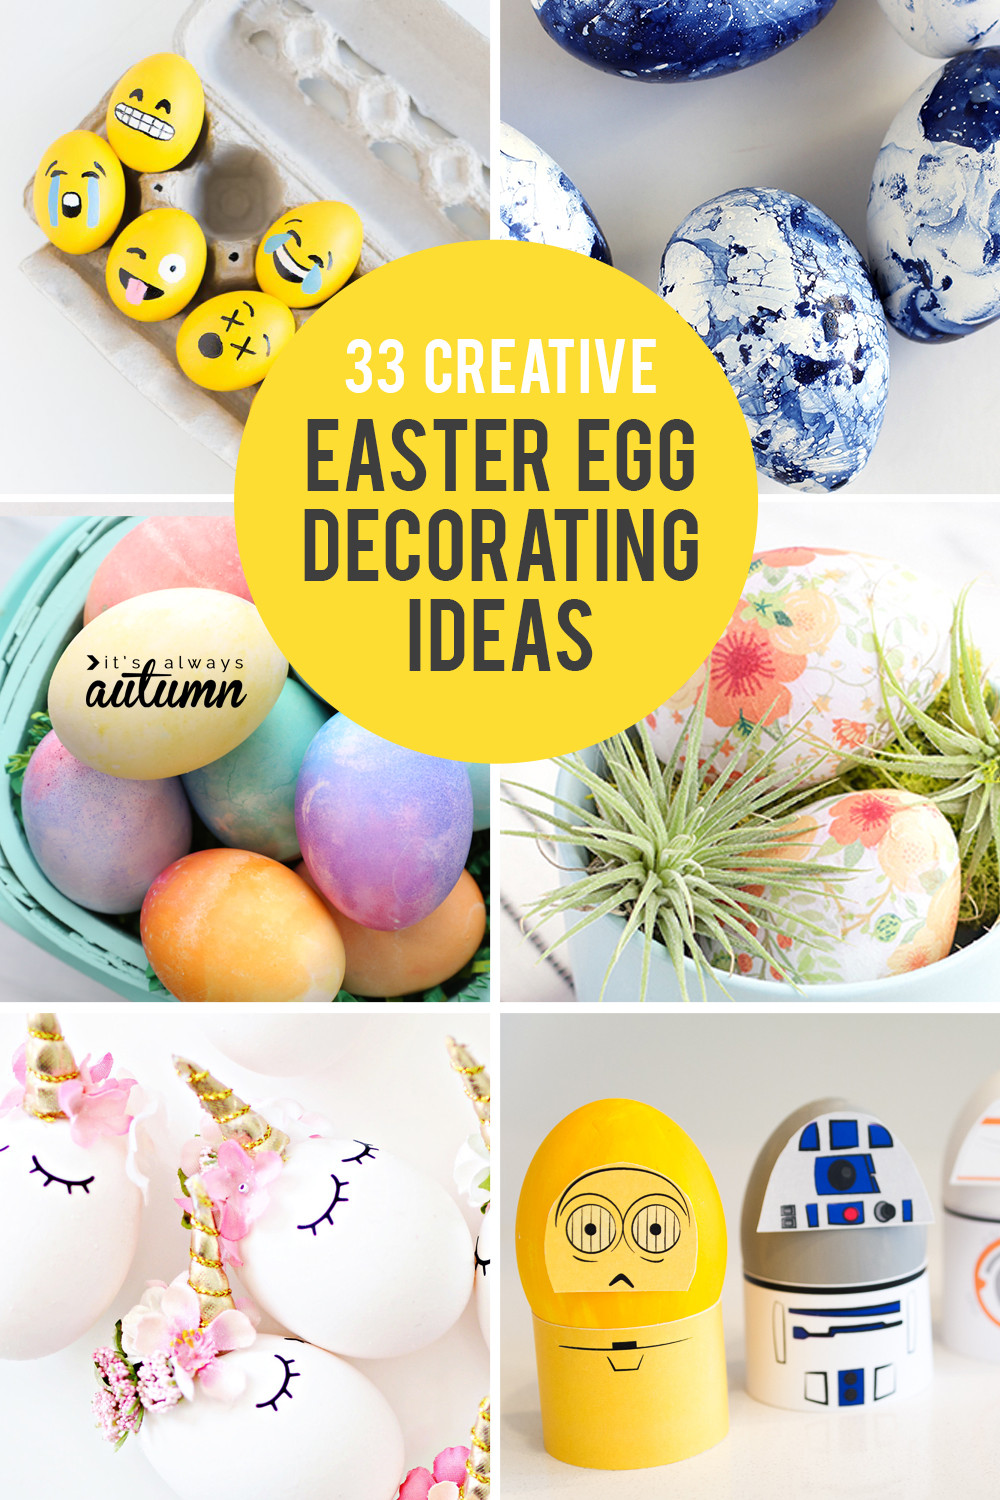 Easter Egg Decoration Ideas
 33 AMAZING egg decorating ideas for Easter ditch the dye